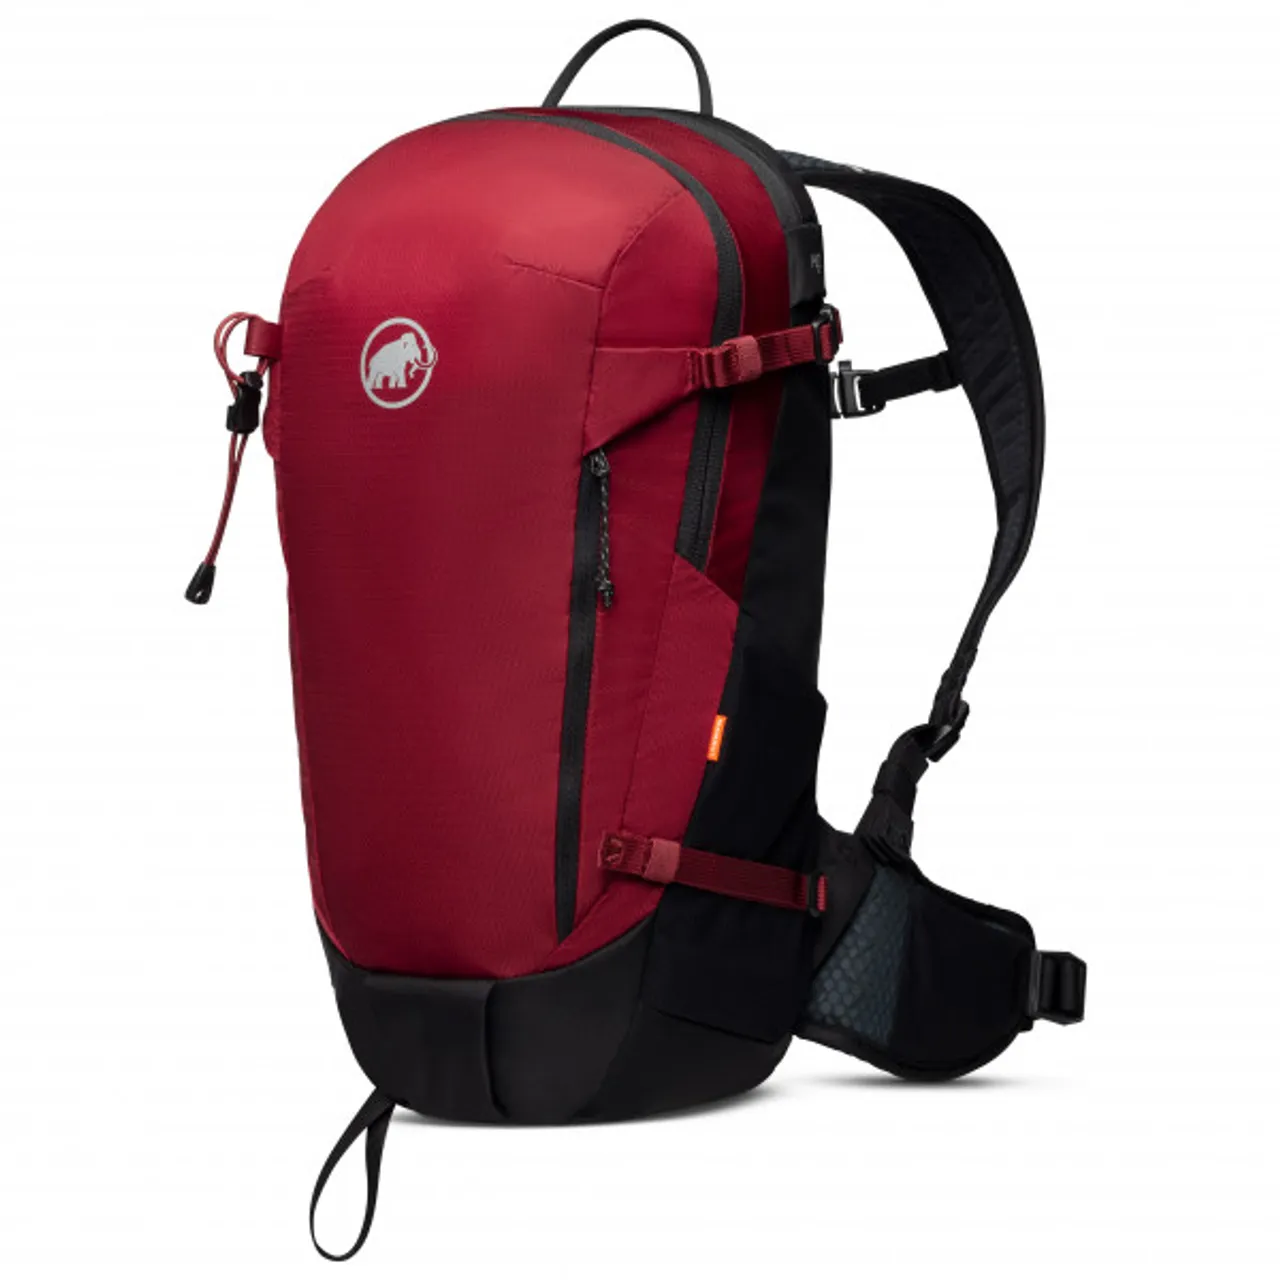 Mammut - Women's Lithium 15 - Walking backpack size 15 l, red